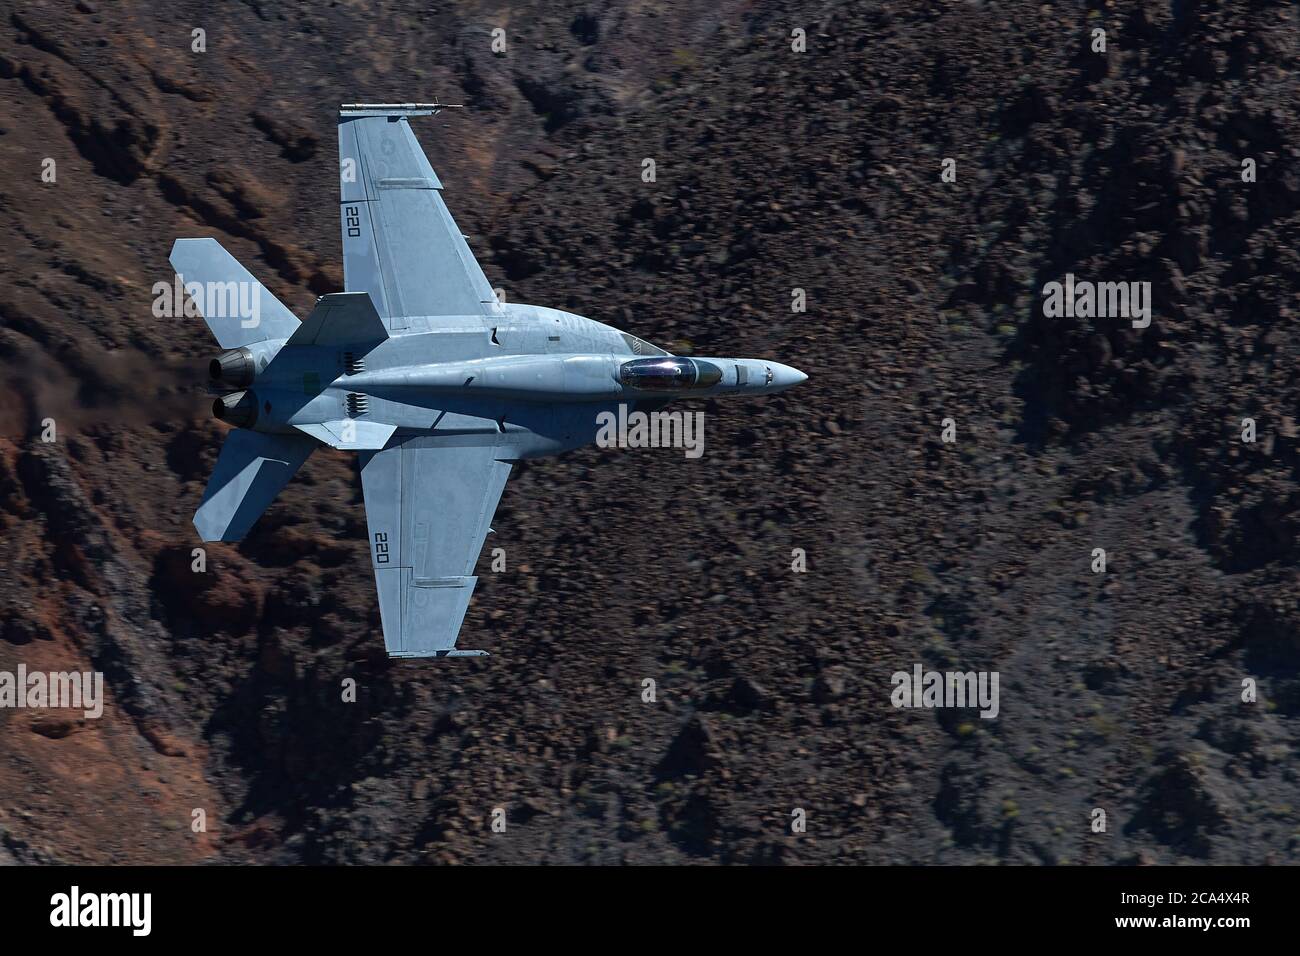 United States Navy F/A-18E Super Hornet Jet Fighter Flying At High Speed And Low Level. Through A Desert Canyon. Stock Photo